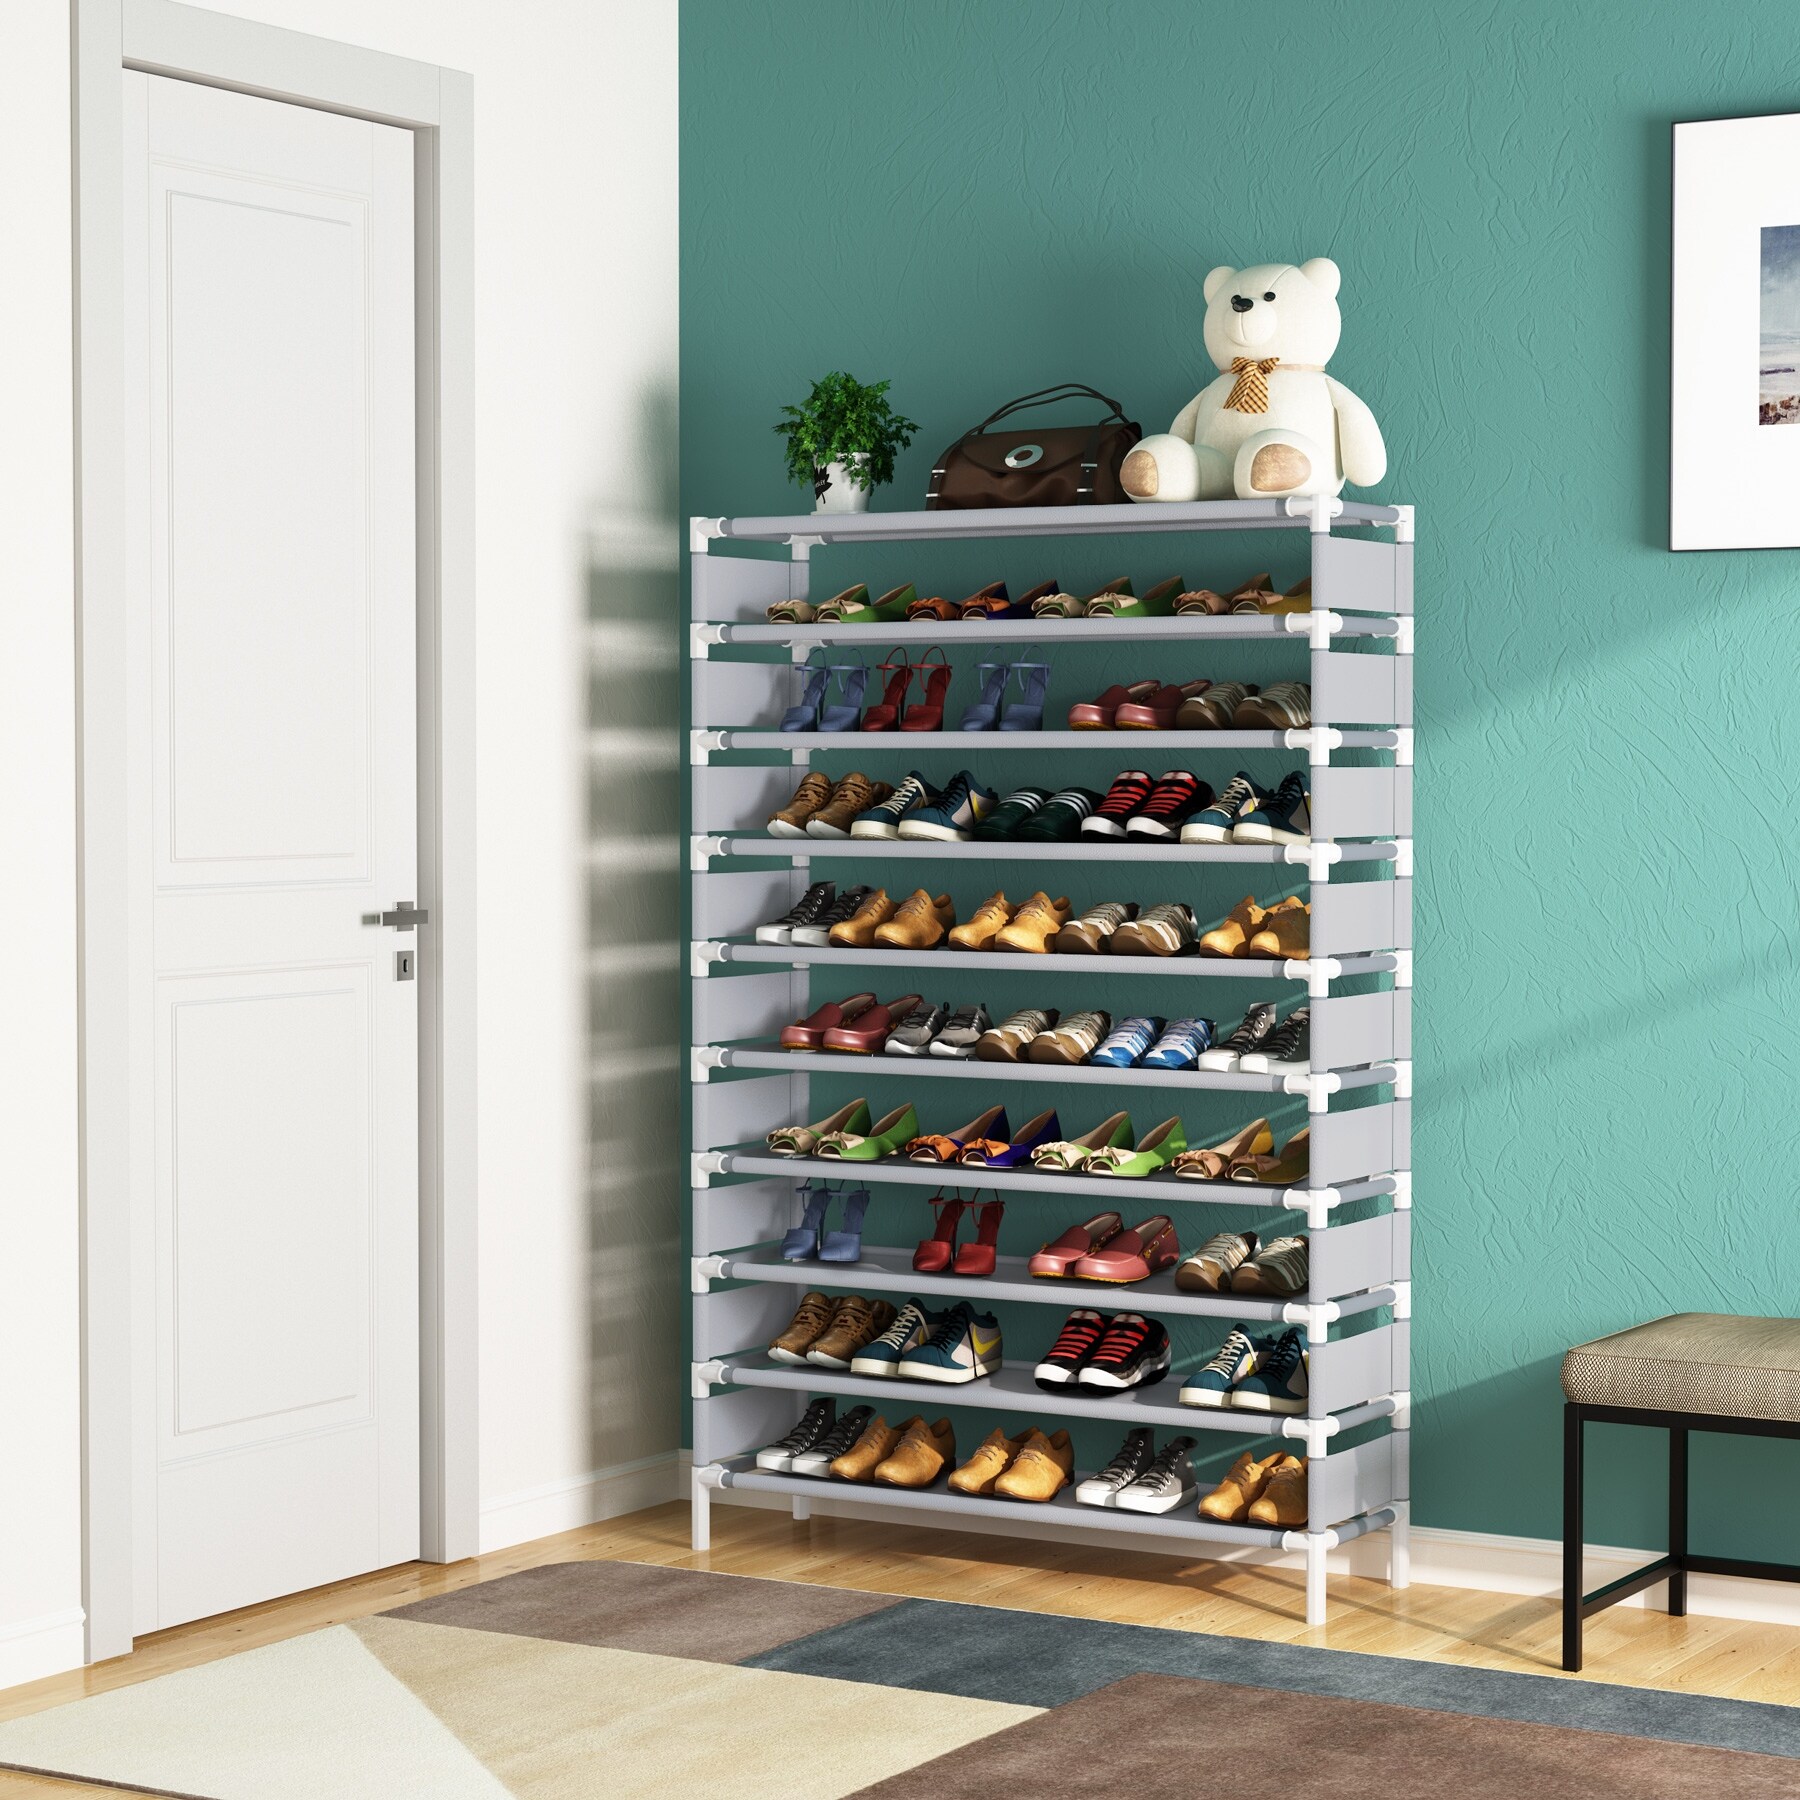 https://ak1.ostkcdn.com/images/products/is/images/direct/2ae835e9b0dc9ab22a57f75dbe719a55170b2a1a/10-Tiers-Shoe-Rack%2C-Large-Capacity-Shoe-Organizer%2C-Shoe-Shelf-for-50-Pair.jpg